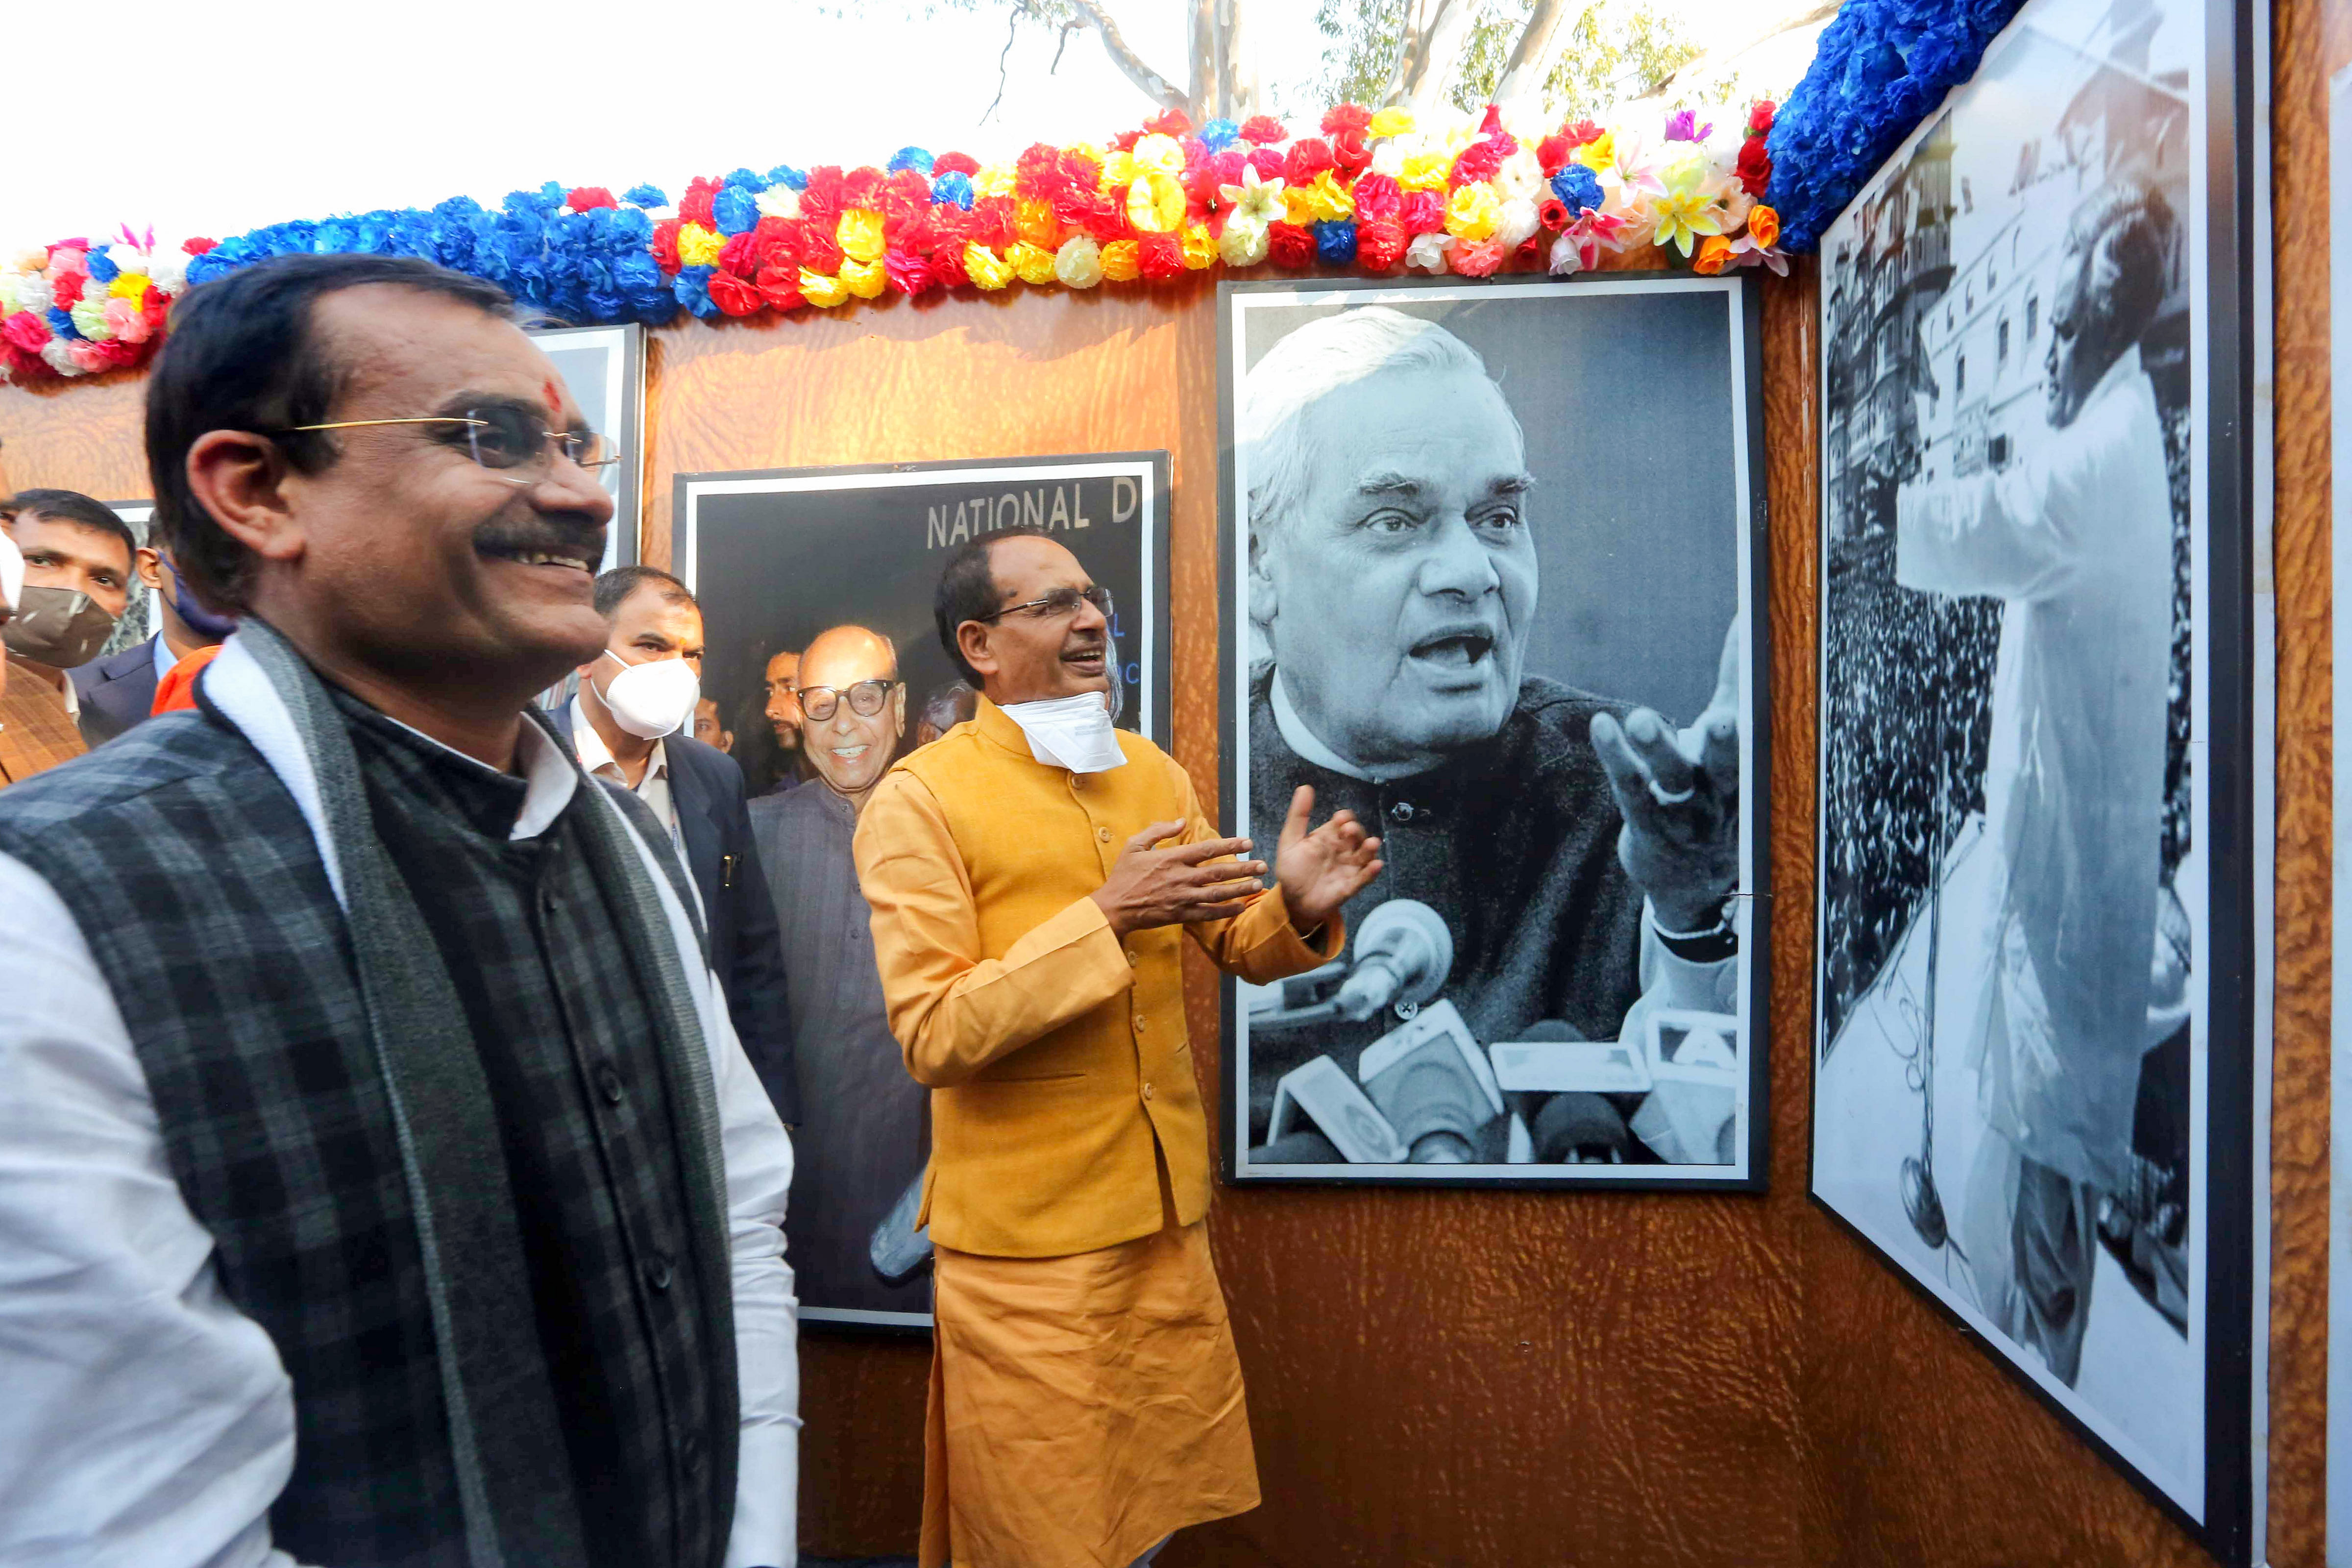 Madhya Pradesh Chief Minister Shivraj Singh Chouhan with BJP State President VD Sharma goes around a photo exhibition on former Prime Minister Atal Bihari Vajpayee after unveiling his statue on his birth anniversary, in Bhopal, Friday, Dec. 25, 2020. Credit: PTI Photo